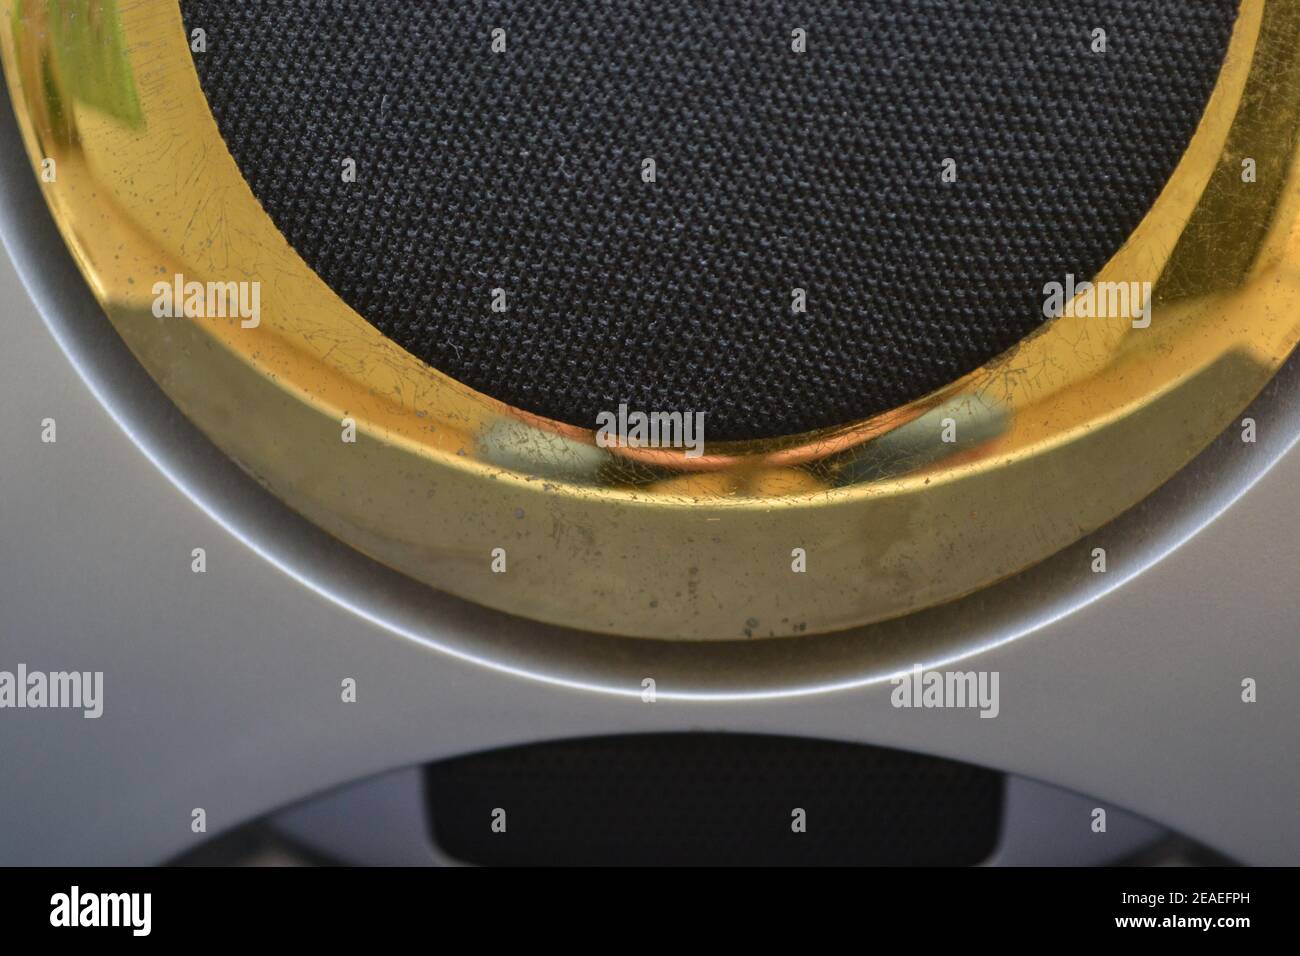 Sound speake futuristic style photo used as scene background in selective focus with black gray and gold colors Stock Photo